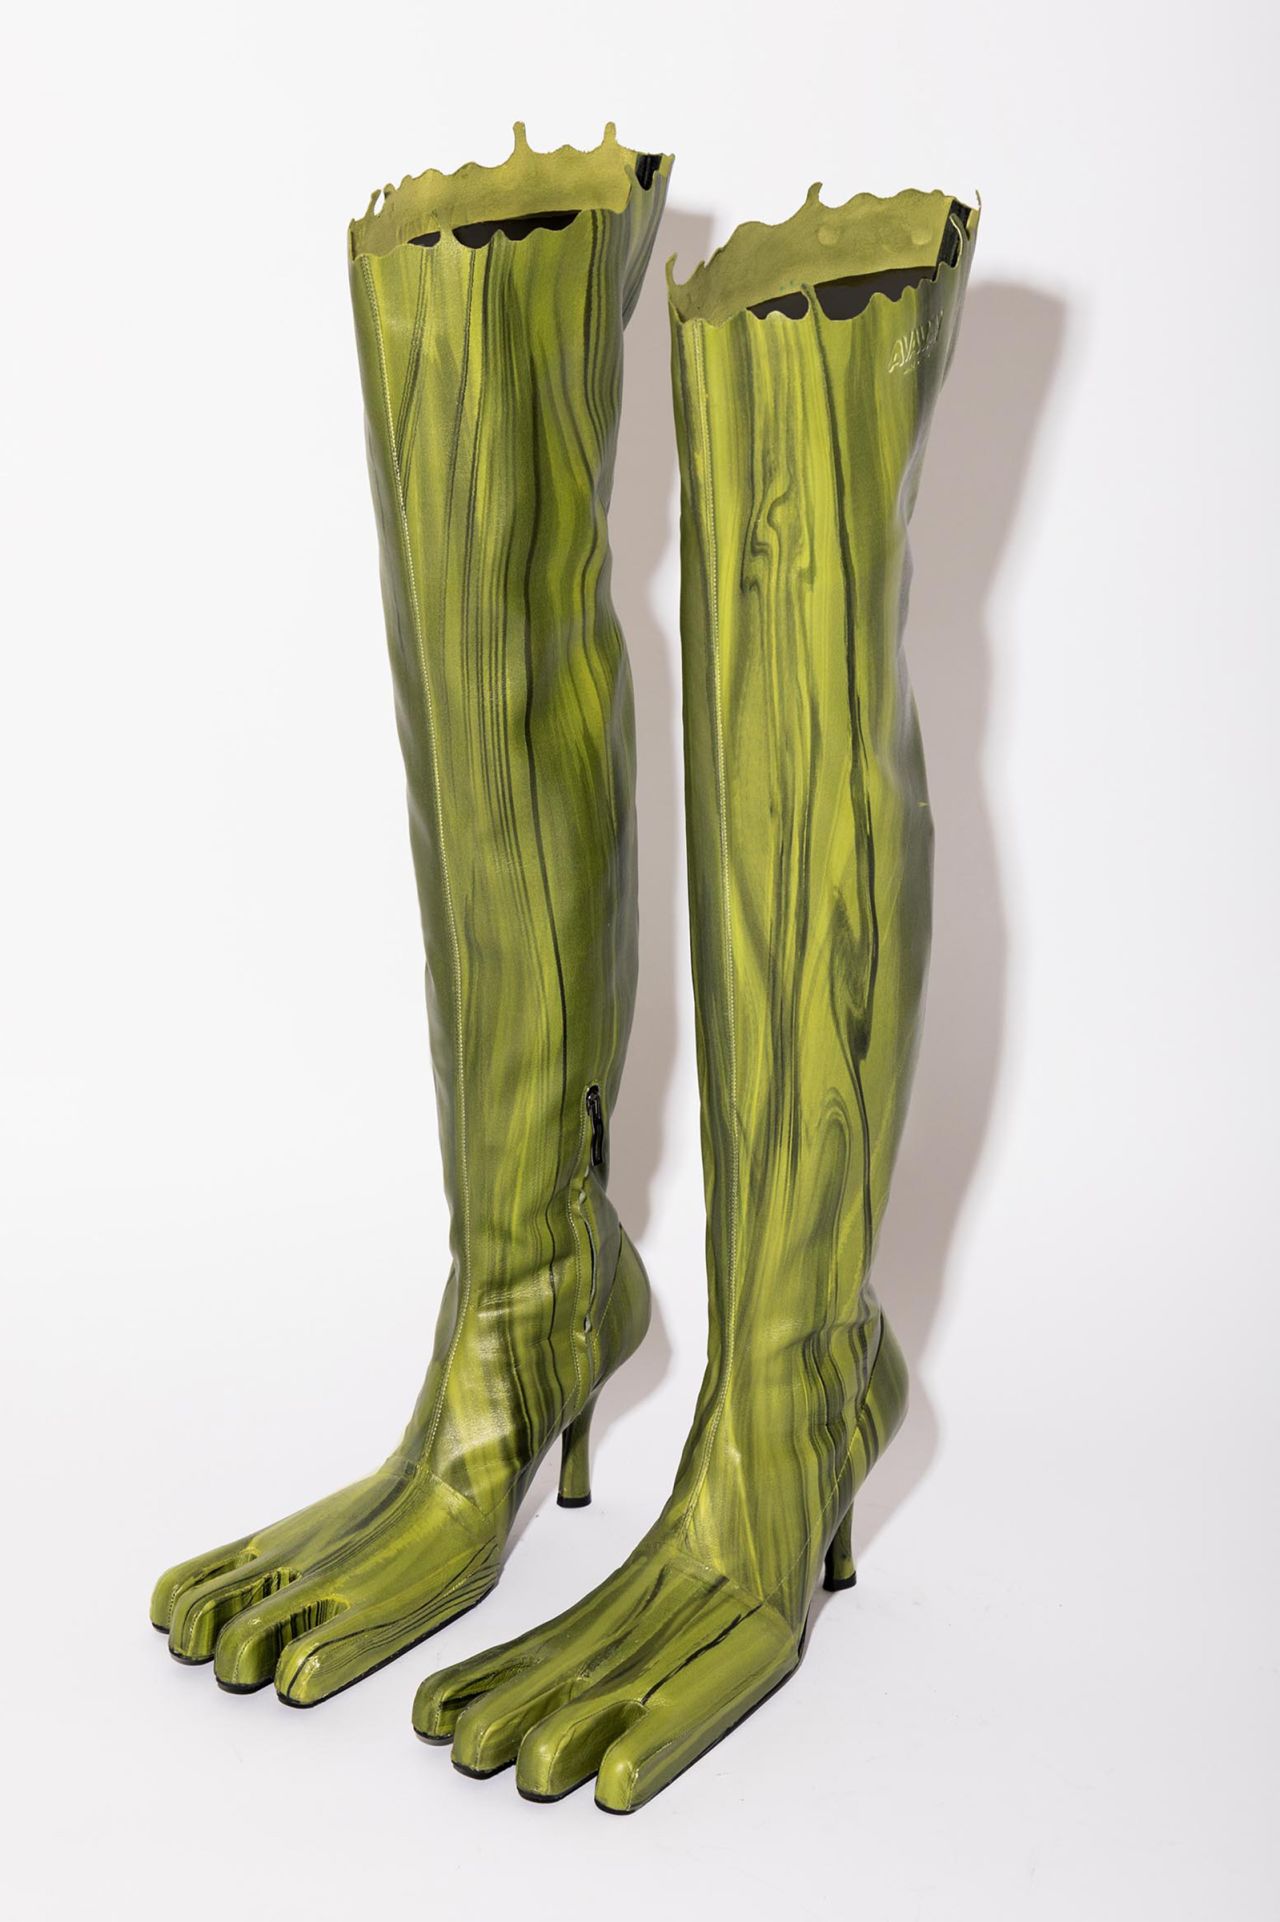 AVAVAV's slime-green boots exaggerate the wearer's digits for a surrealist effect.